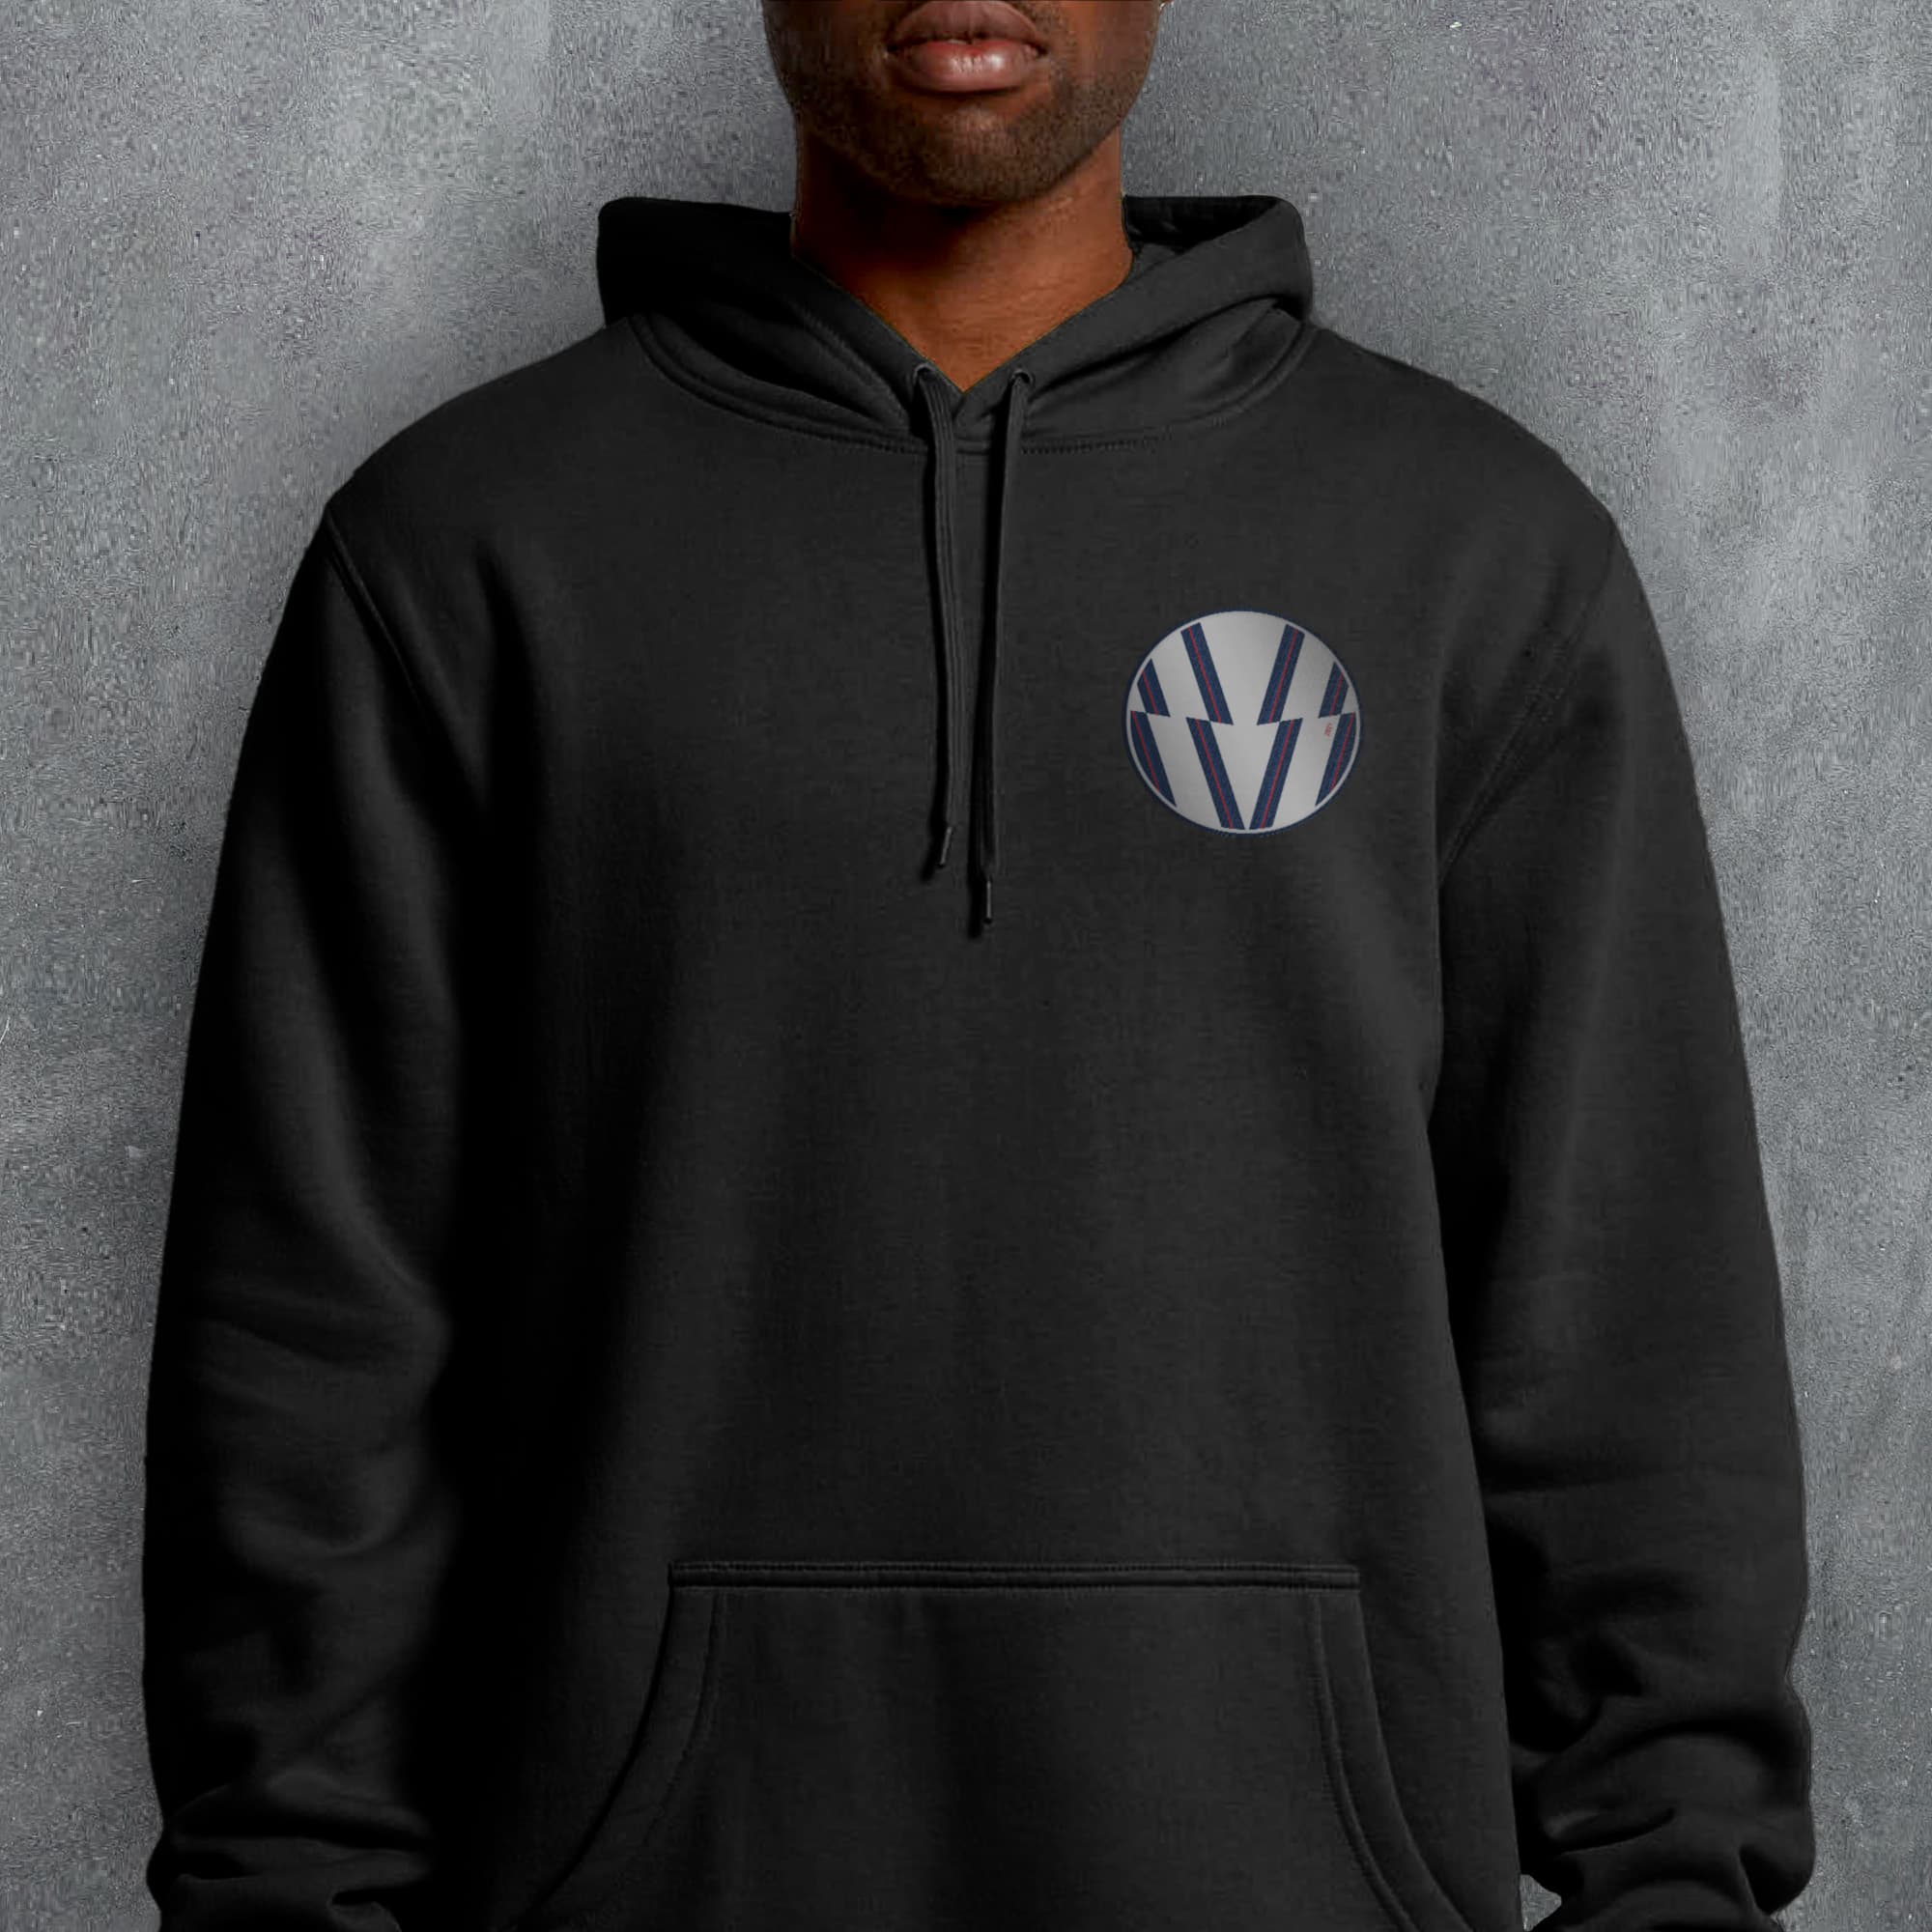 a man wearing a black hoodie with a vw logo on it